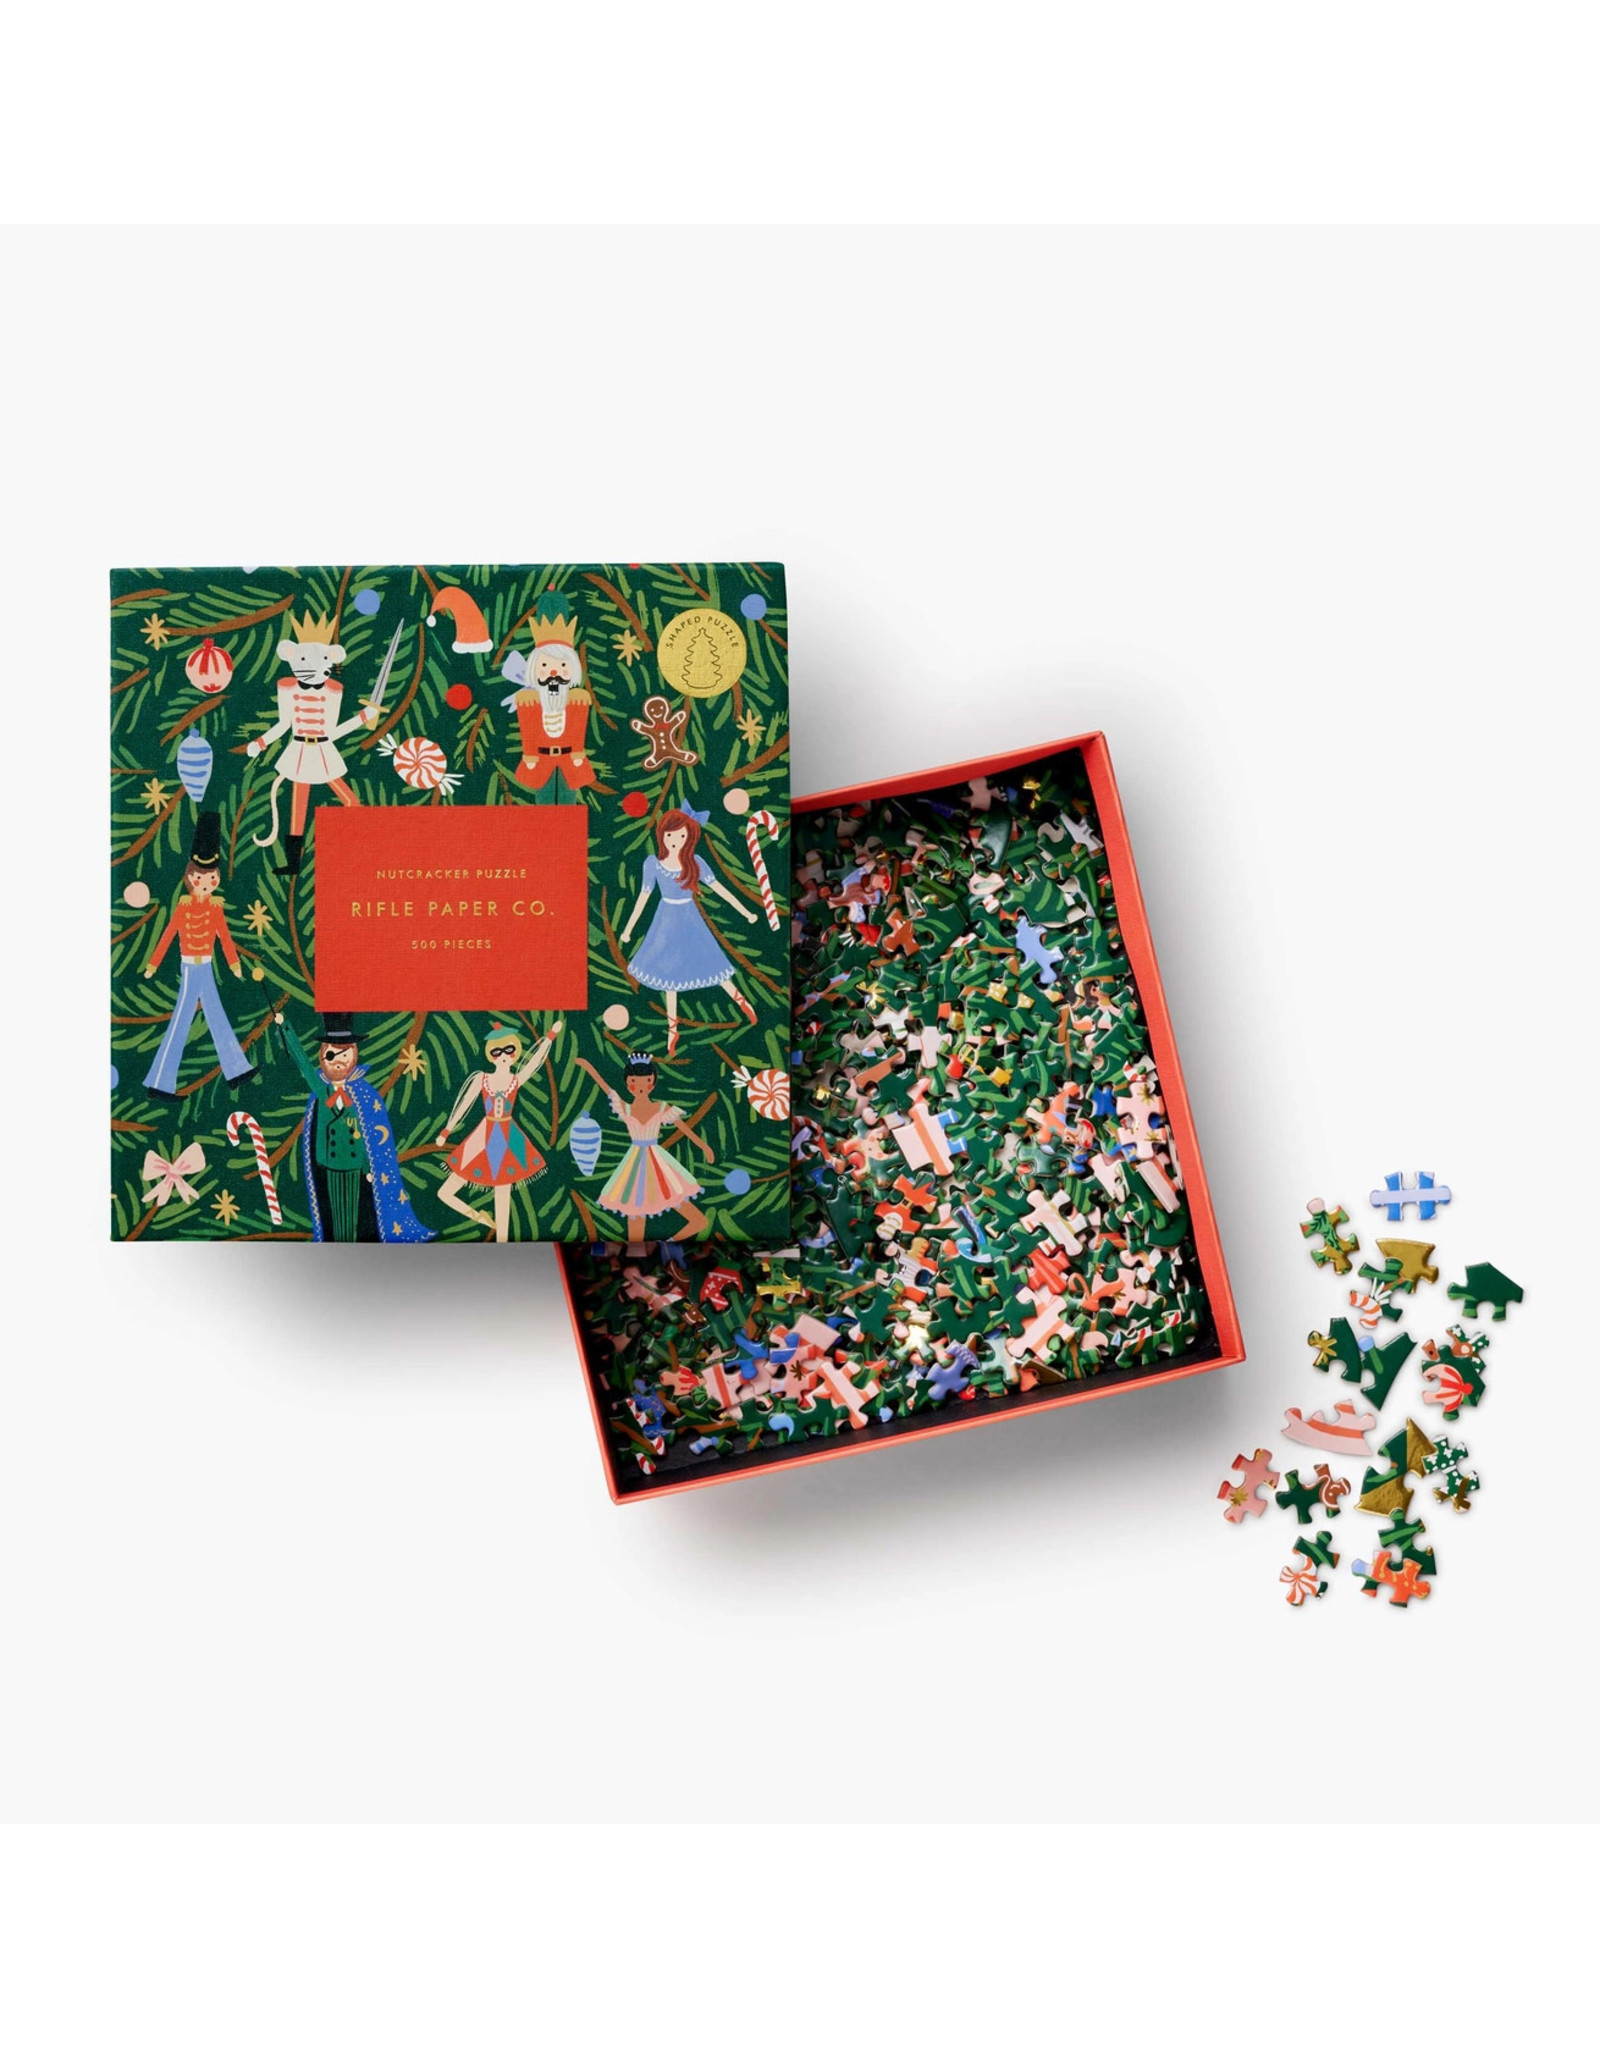 Rifle Paper Co. Nutcracker Holiday Jigsaw Puzzle 500pc